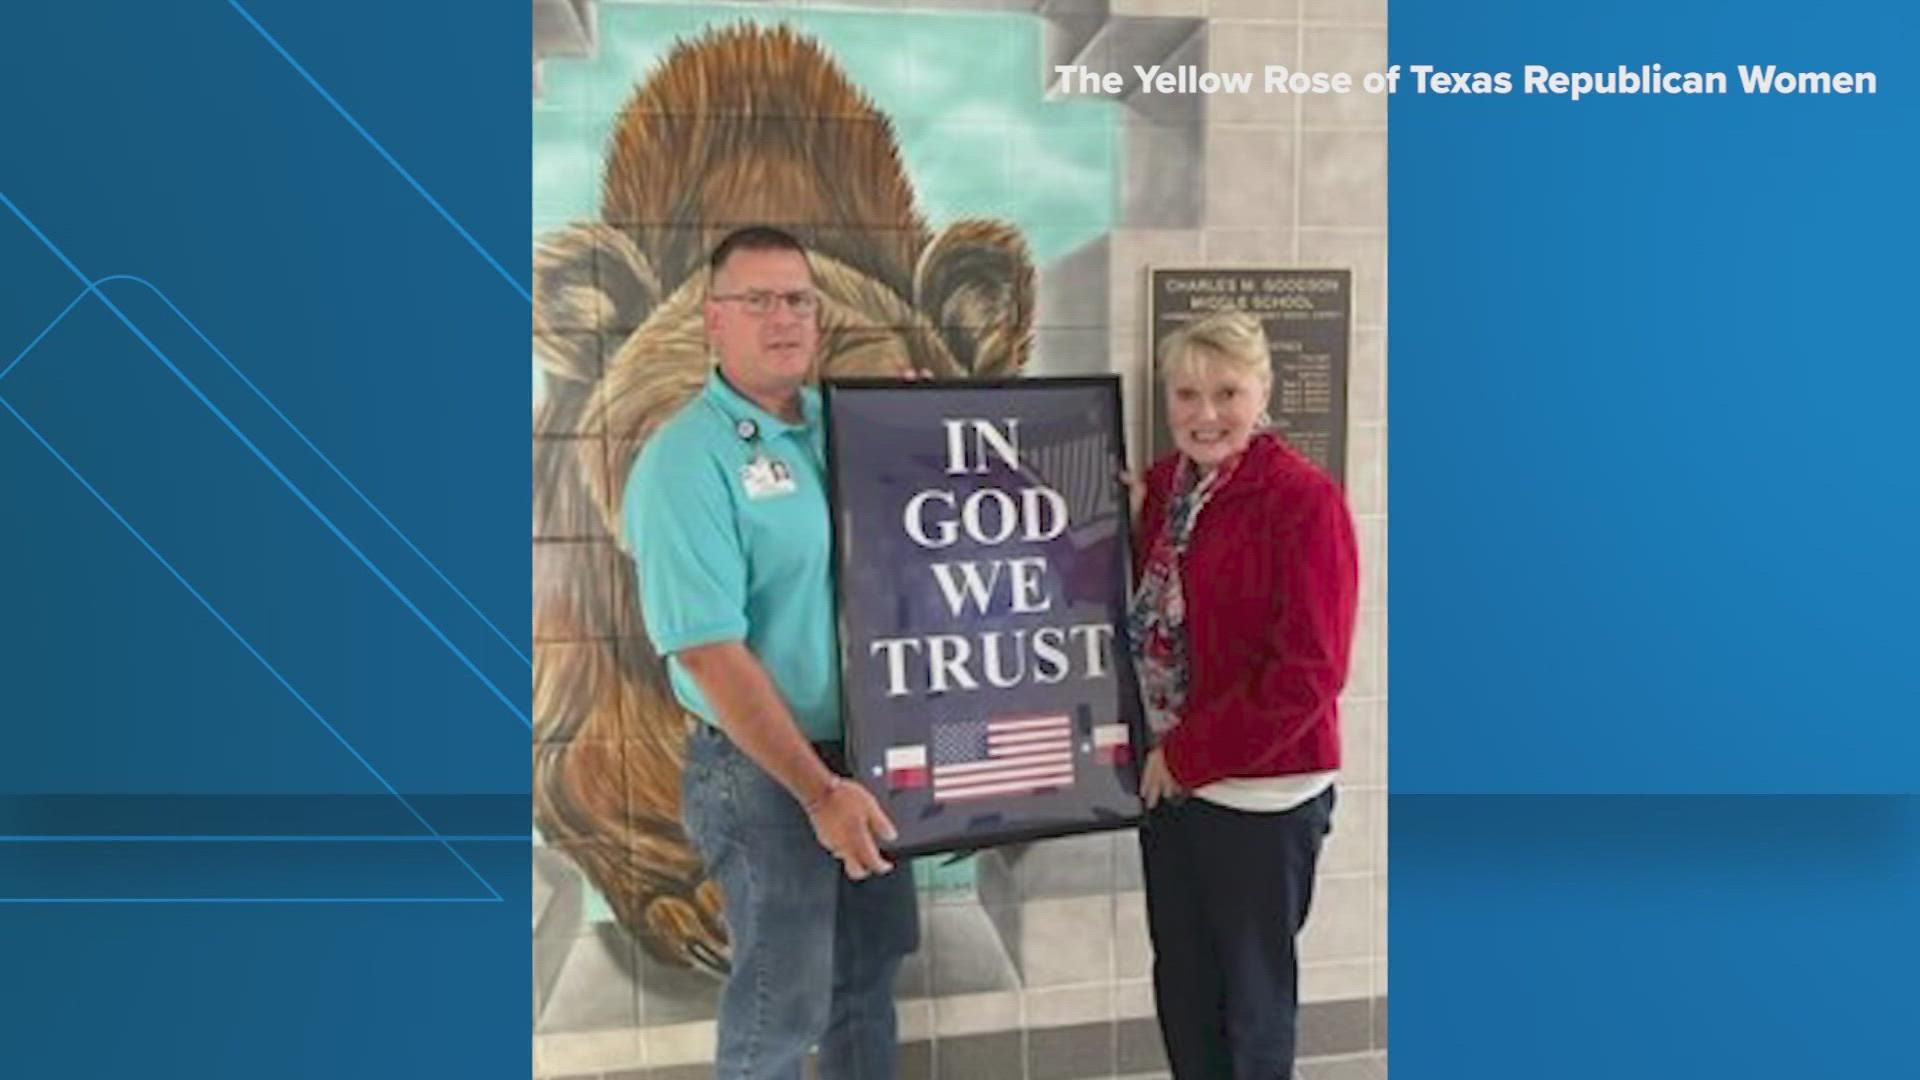 “We just felt like it was a great opportunity to display our national motto in our public schools,” said TX Rep. Tom Oliverson of the Houston area.